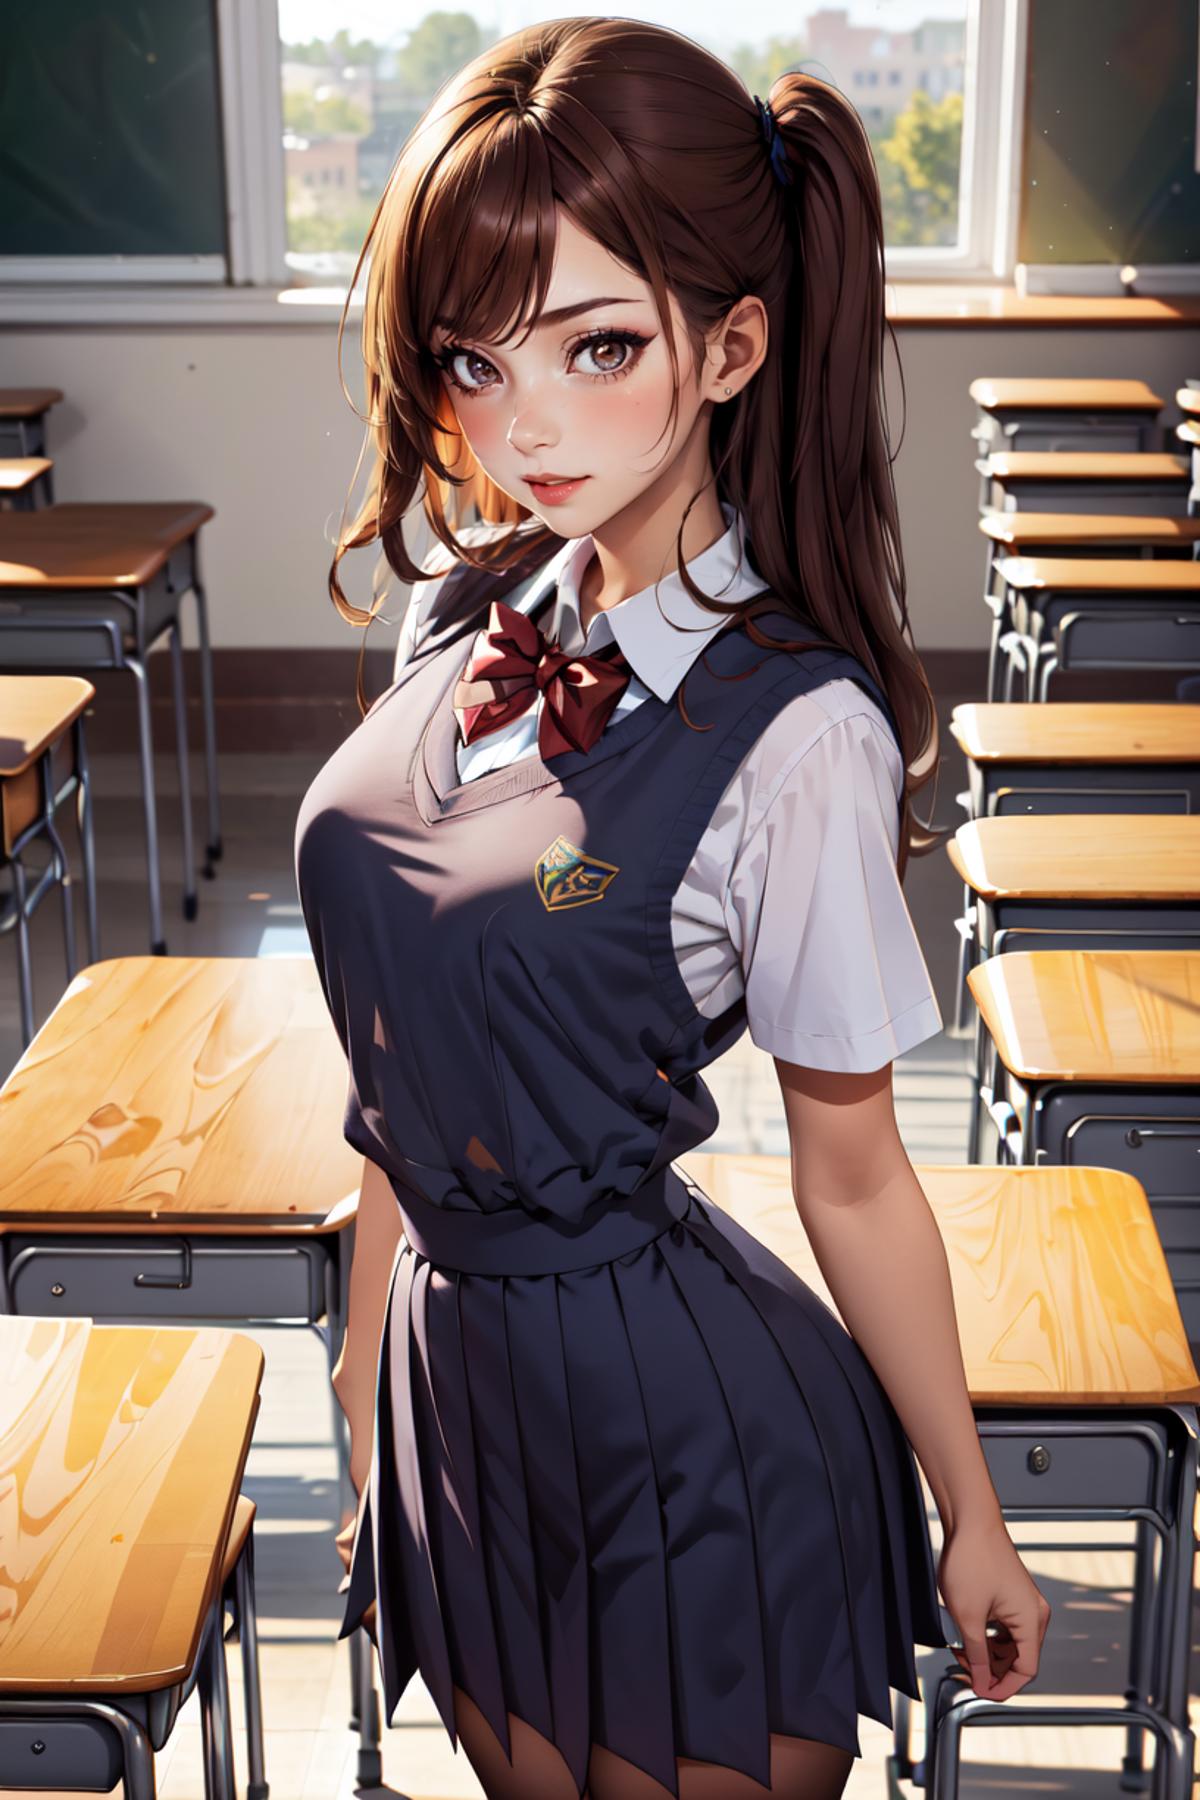 Anime girl wearing a school uniform with a bow in her hair.